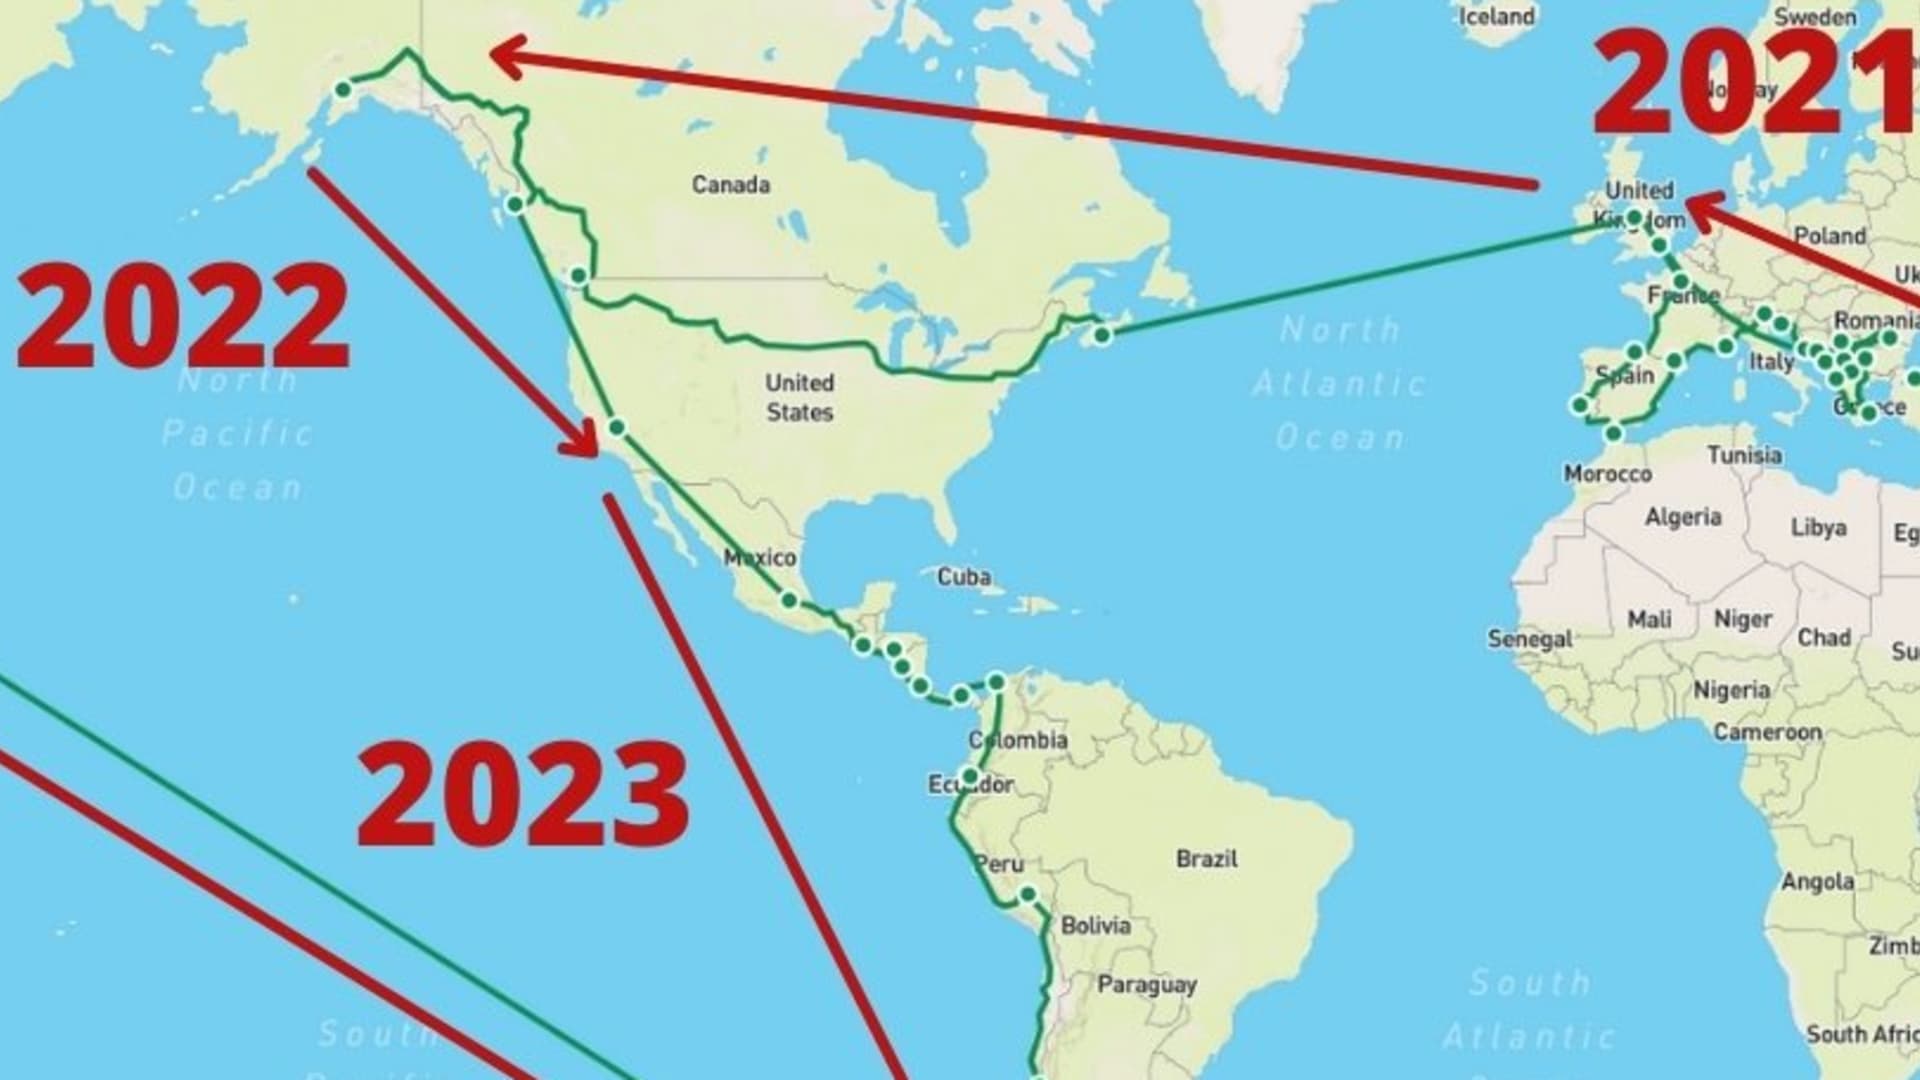 Williams and Magennis' route for 2021-2023 is shown along the green lines, with the red arrows noting the direction they intend to follow